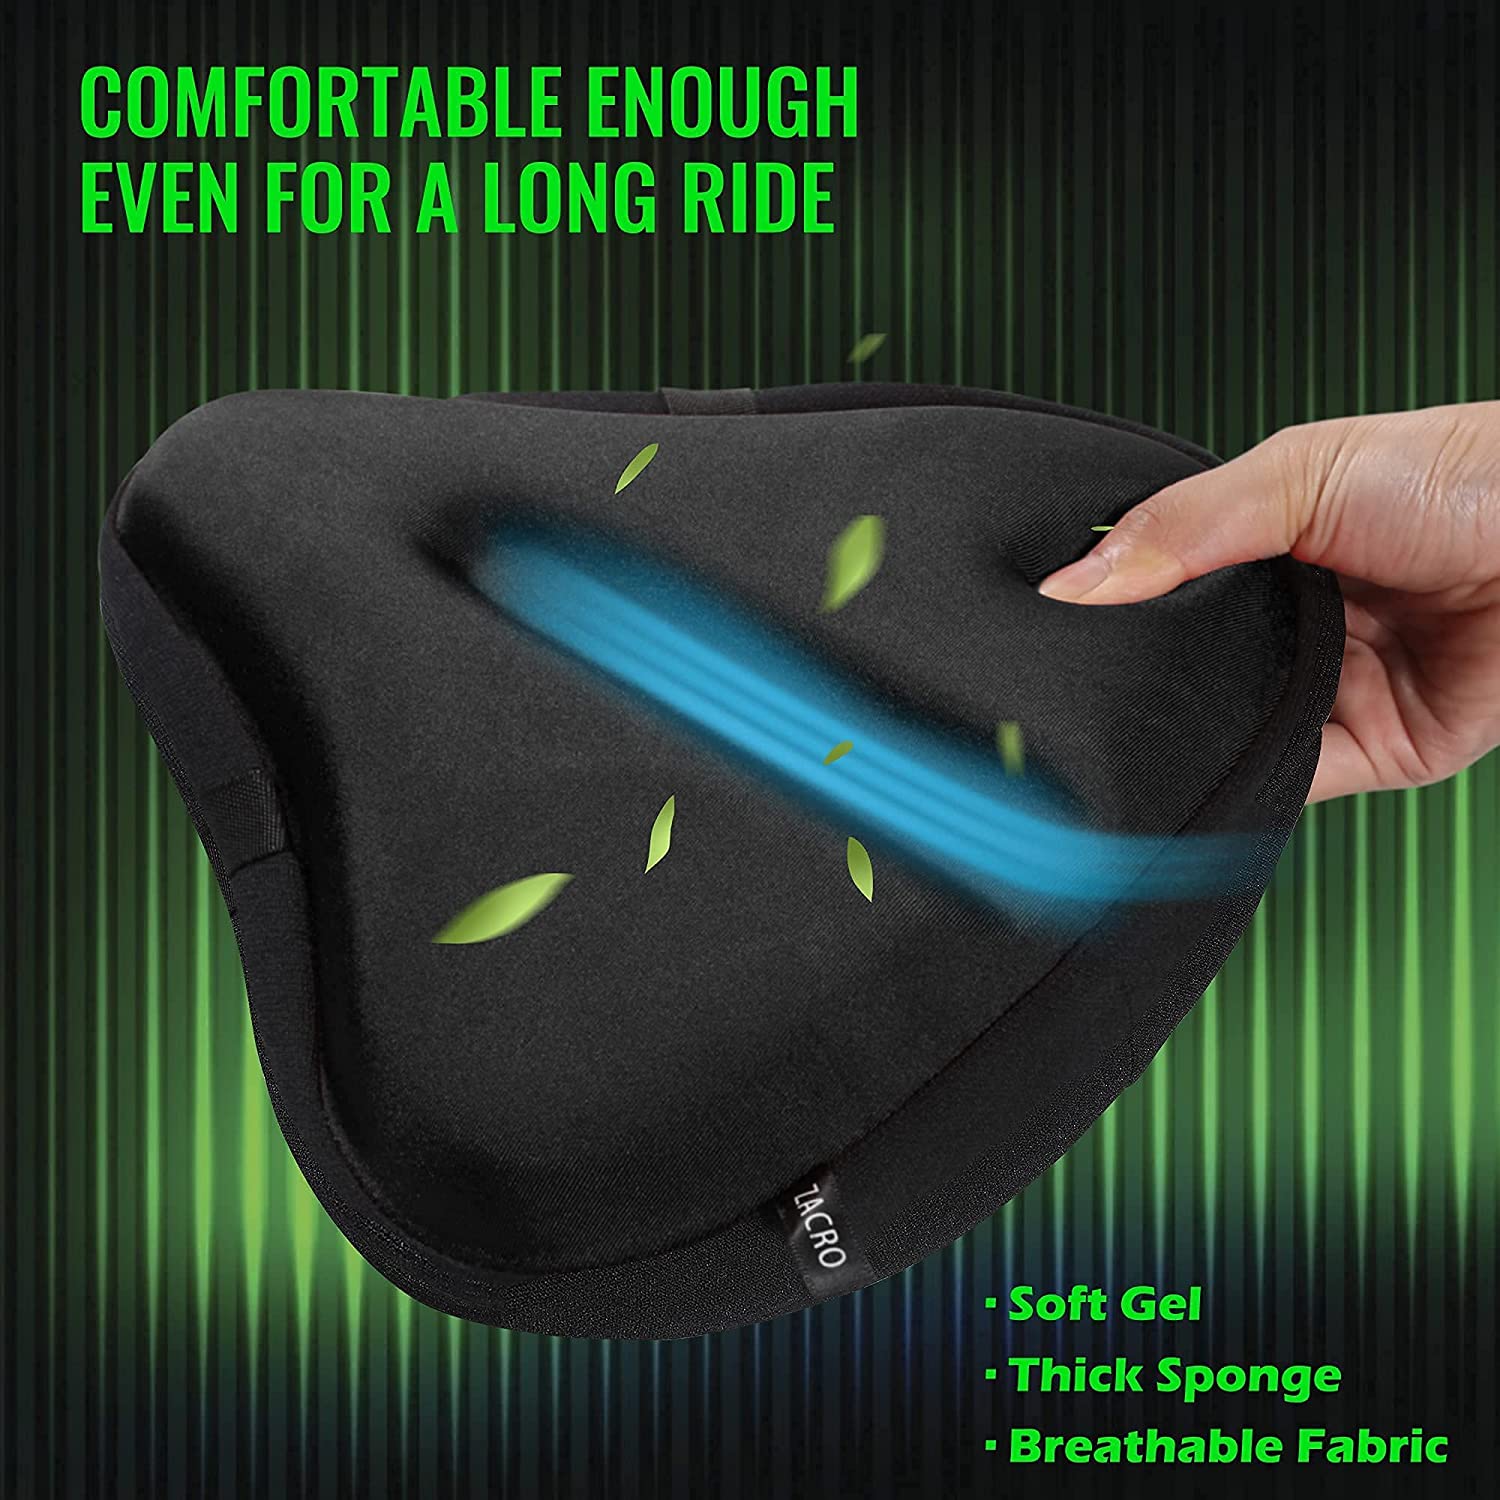 81PXoAaLHCL. AC SL1500  - Zacro Bike Seat Cushion - Gel Padded Wide Adjustable Cover for Men & Womens Comfort, Compatible with Peloton, Stationary Exercise or Cruiser Bicycle Seats, 11.4in X 10.4in, Water&Dust Resistant Cover